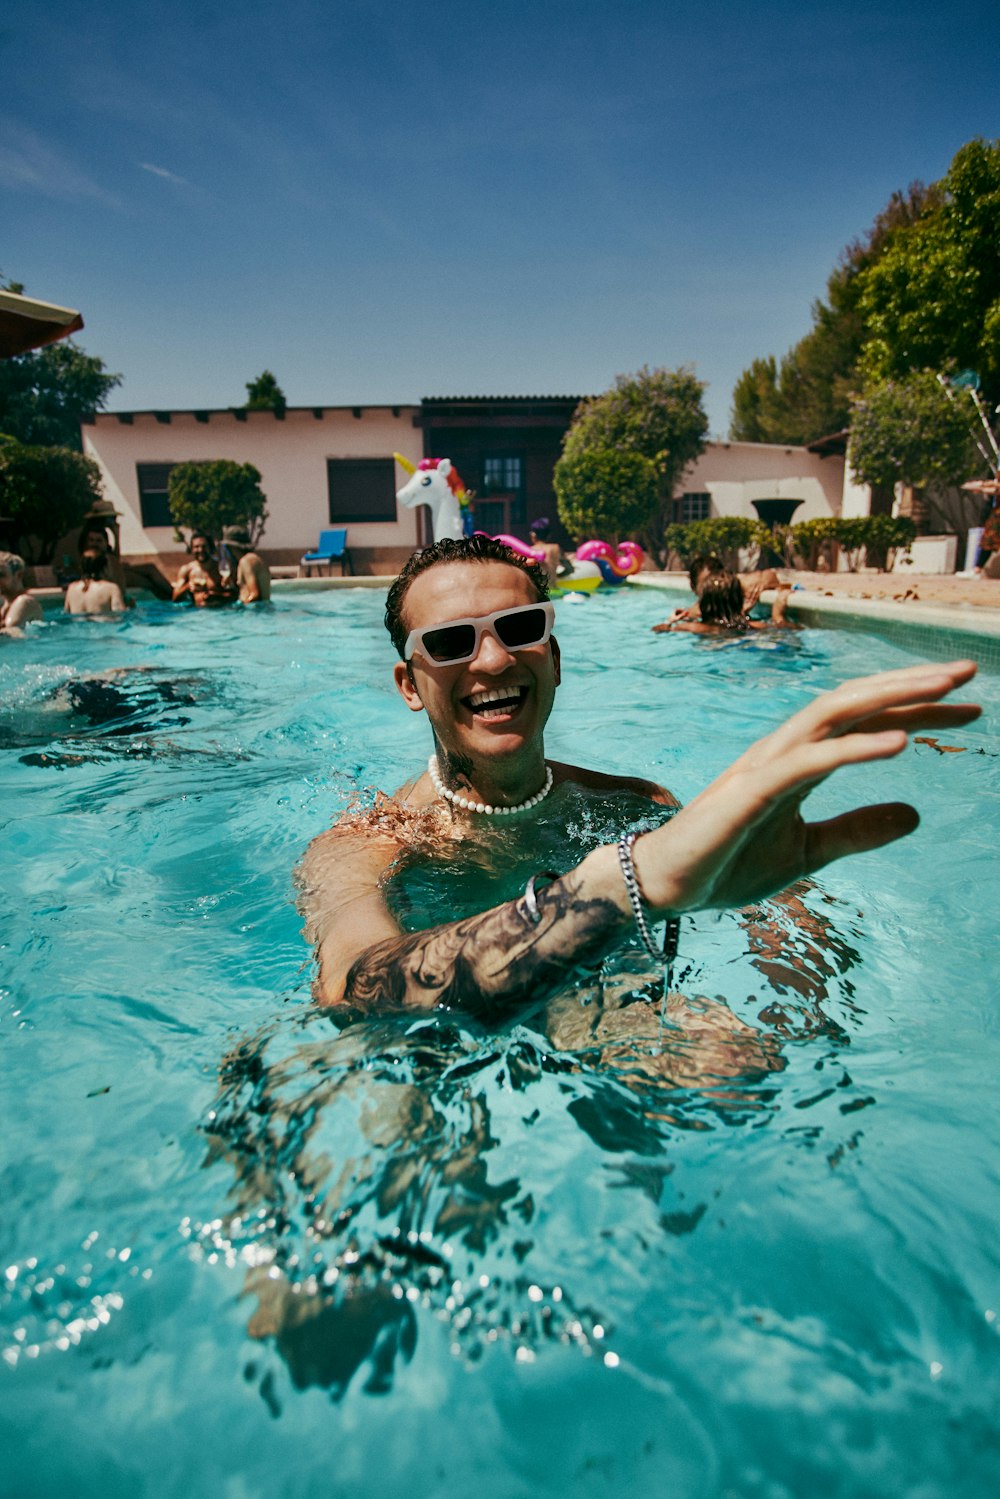 a man swimming in a pool with people in the background